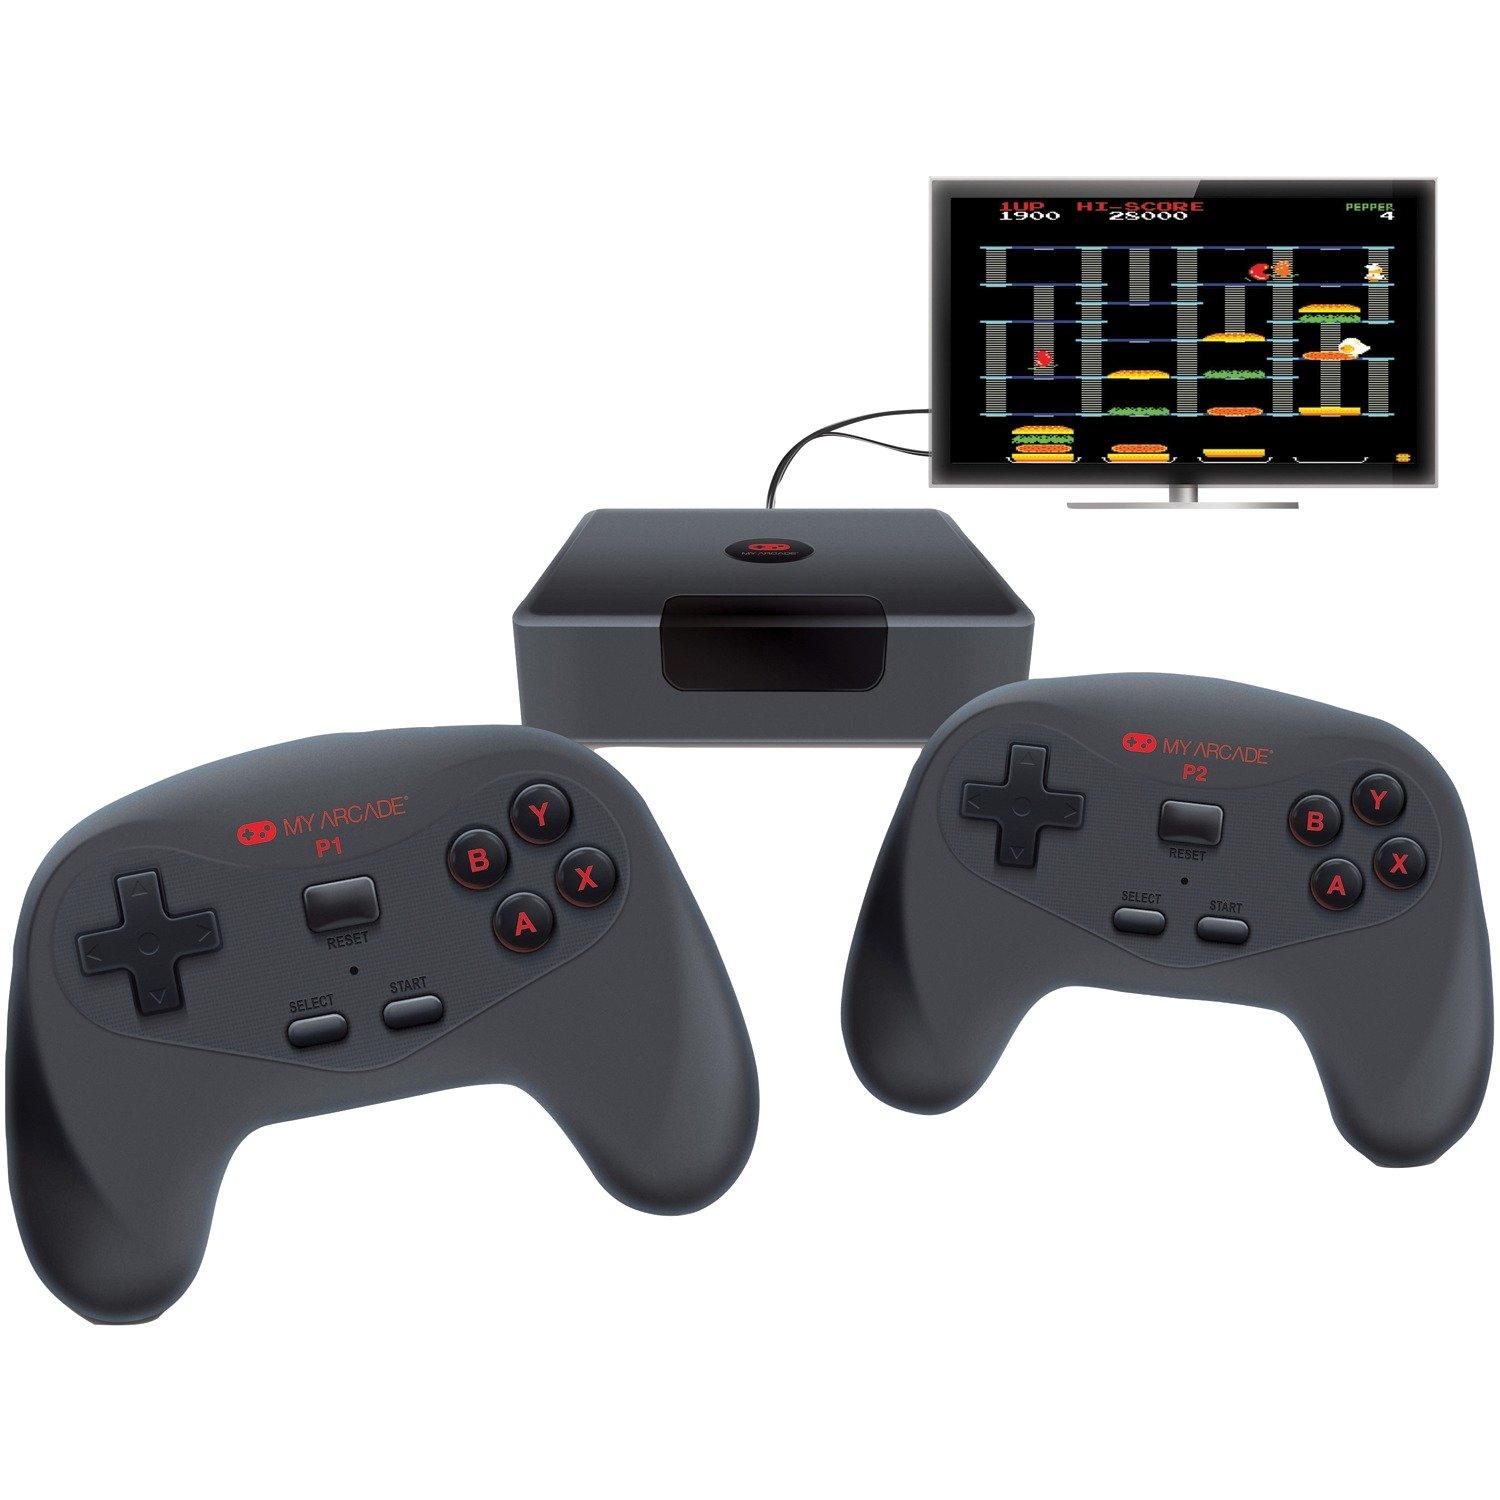 My Arcade GameStation Wireless Plug & Play Game Console with 2 Controllers